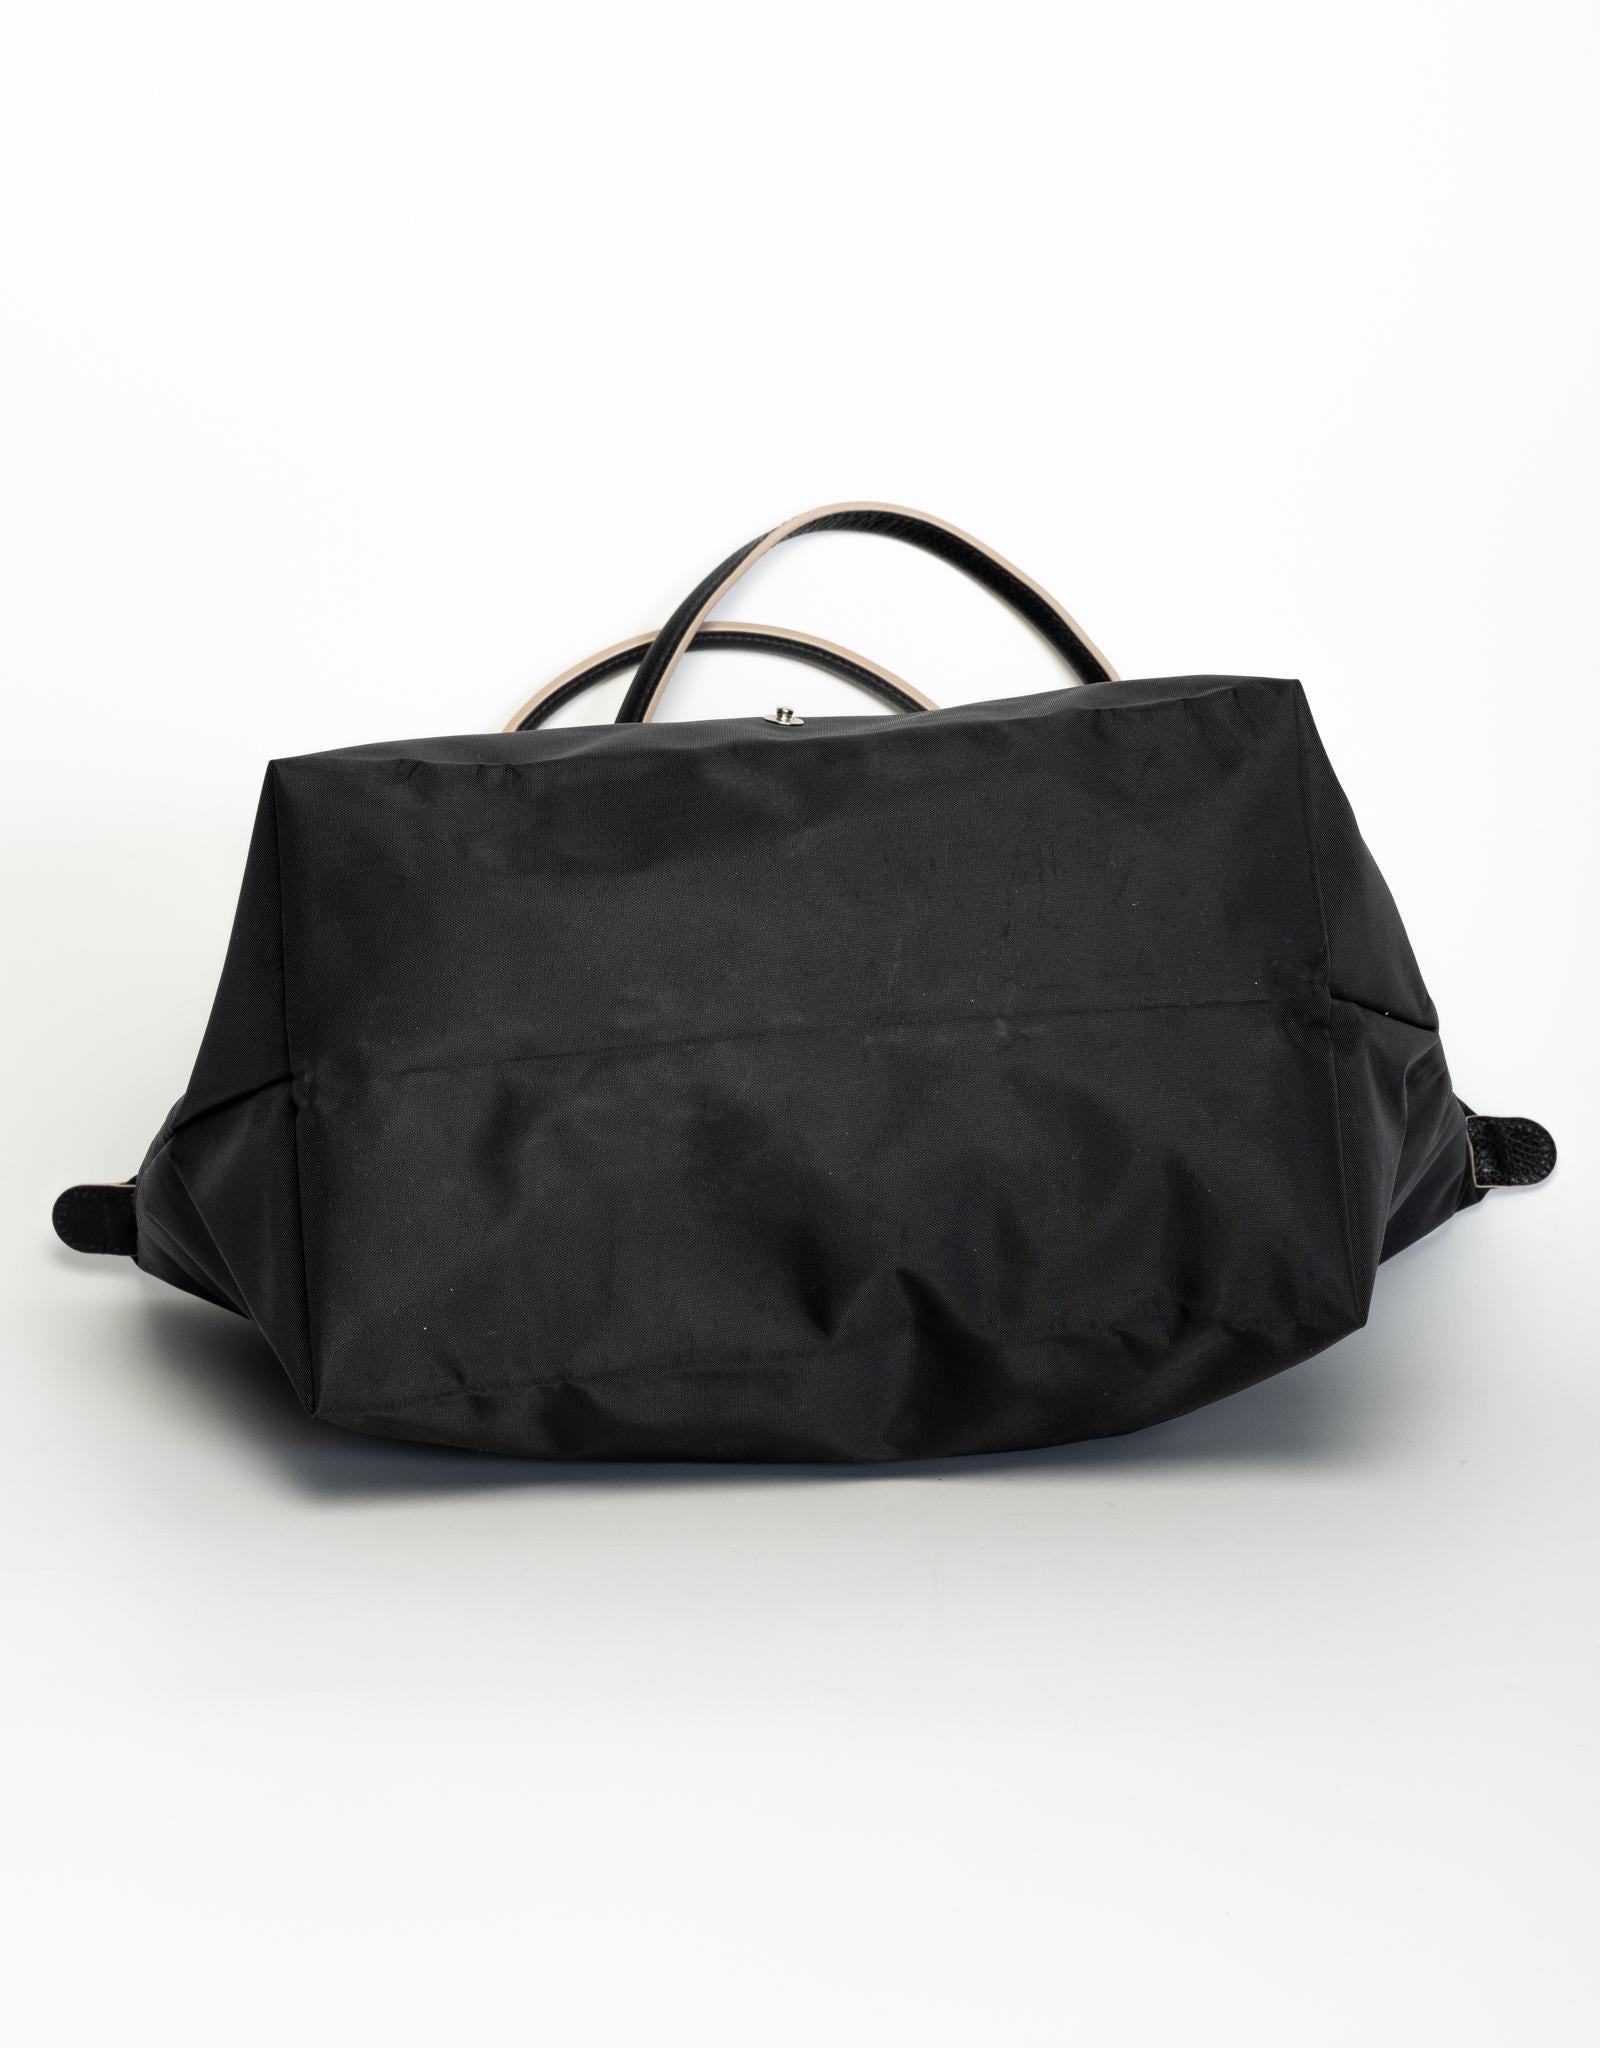 Longchamp classic Le Pliage bag (‘folding’ in French) in black nylon fabric with leather straps. Featuring top zipper closure and an open interior. Perfect for traveling.

COLOR: Black
MATERIAL: Nylon
MEASURES: H 12” x L 19.5” x D 7.5”

Made in